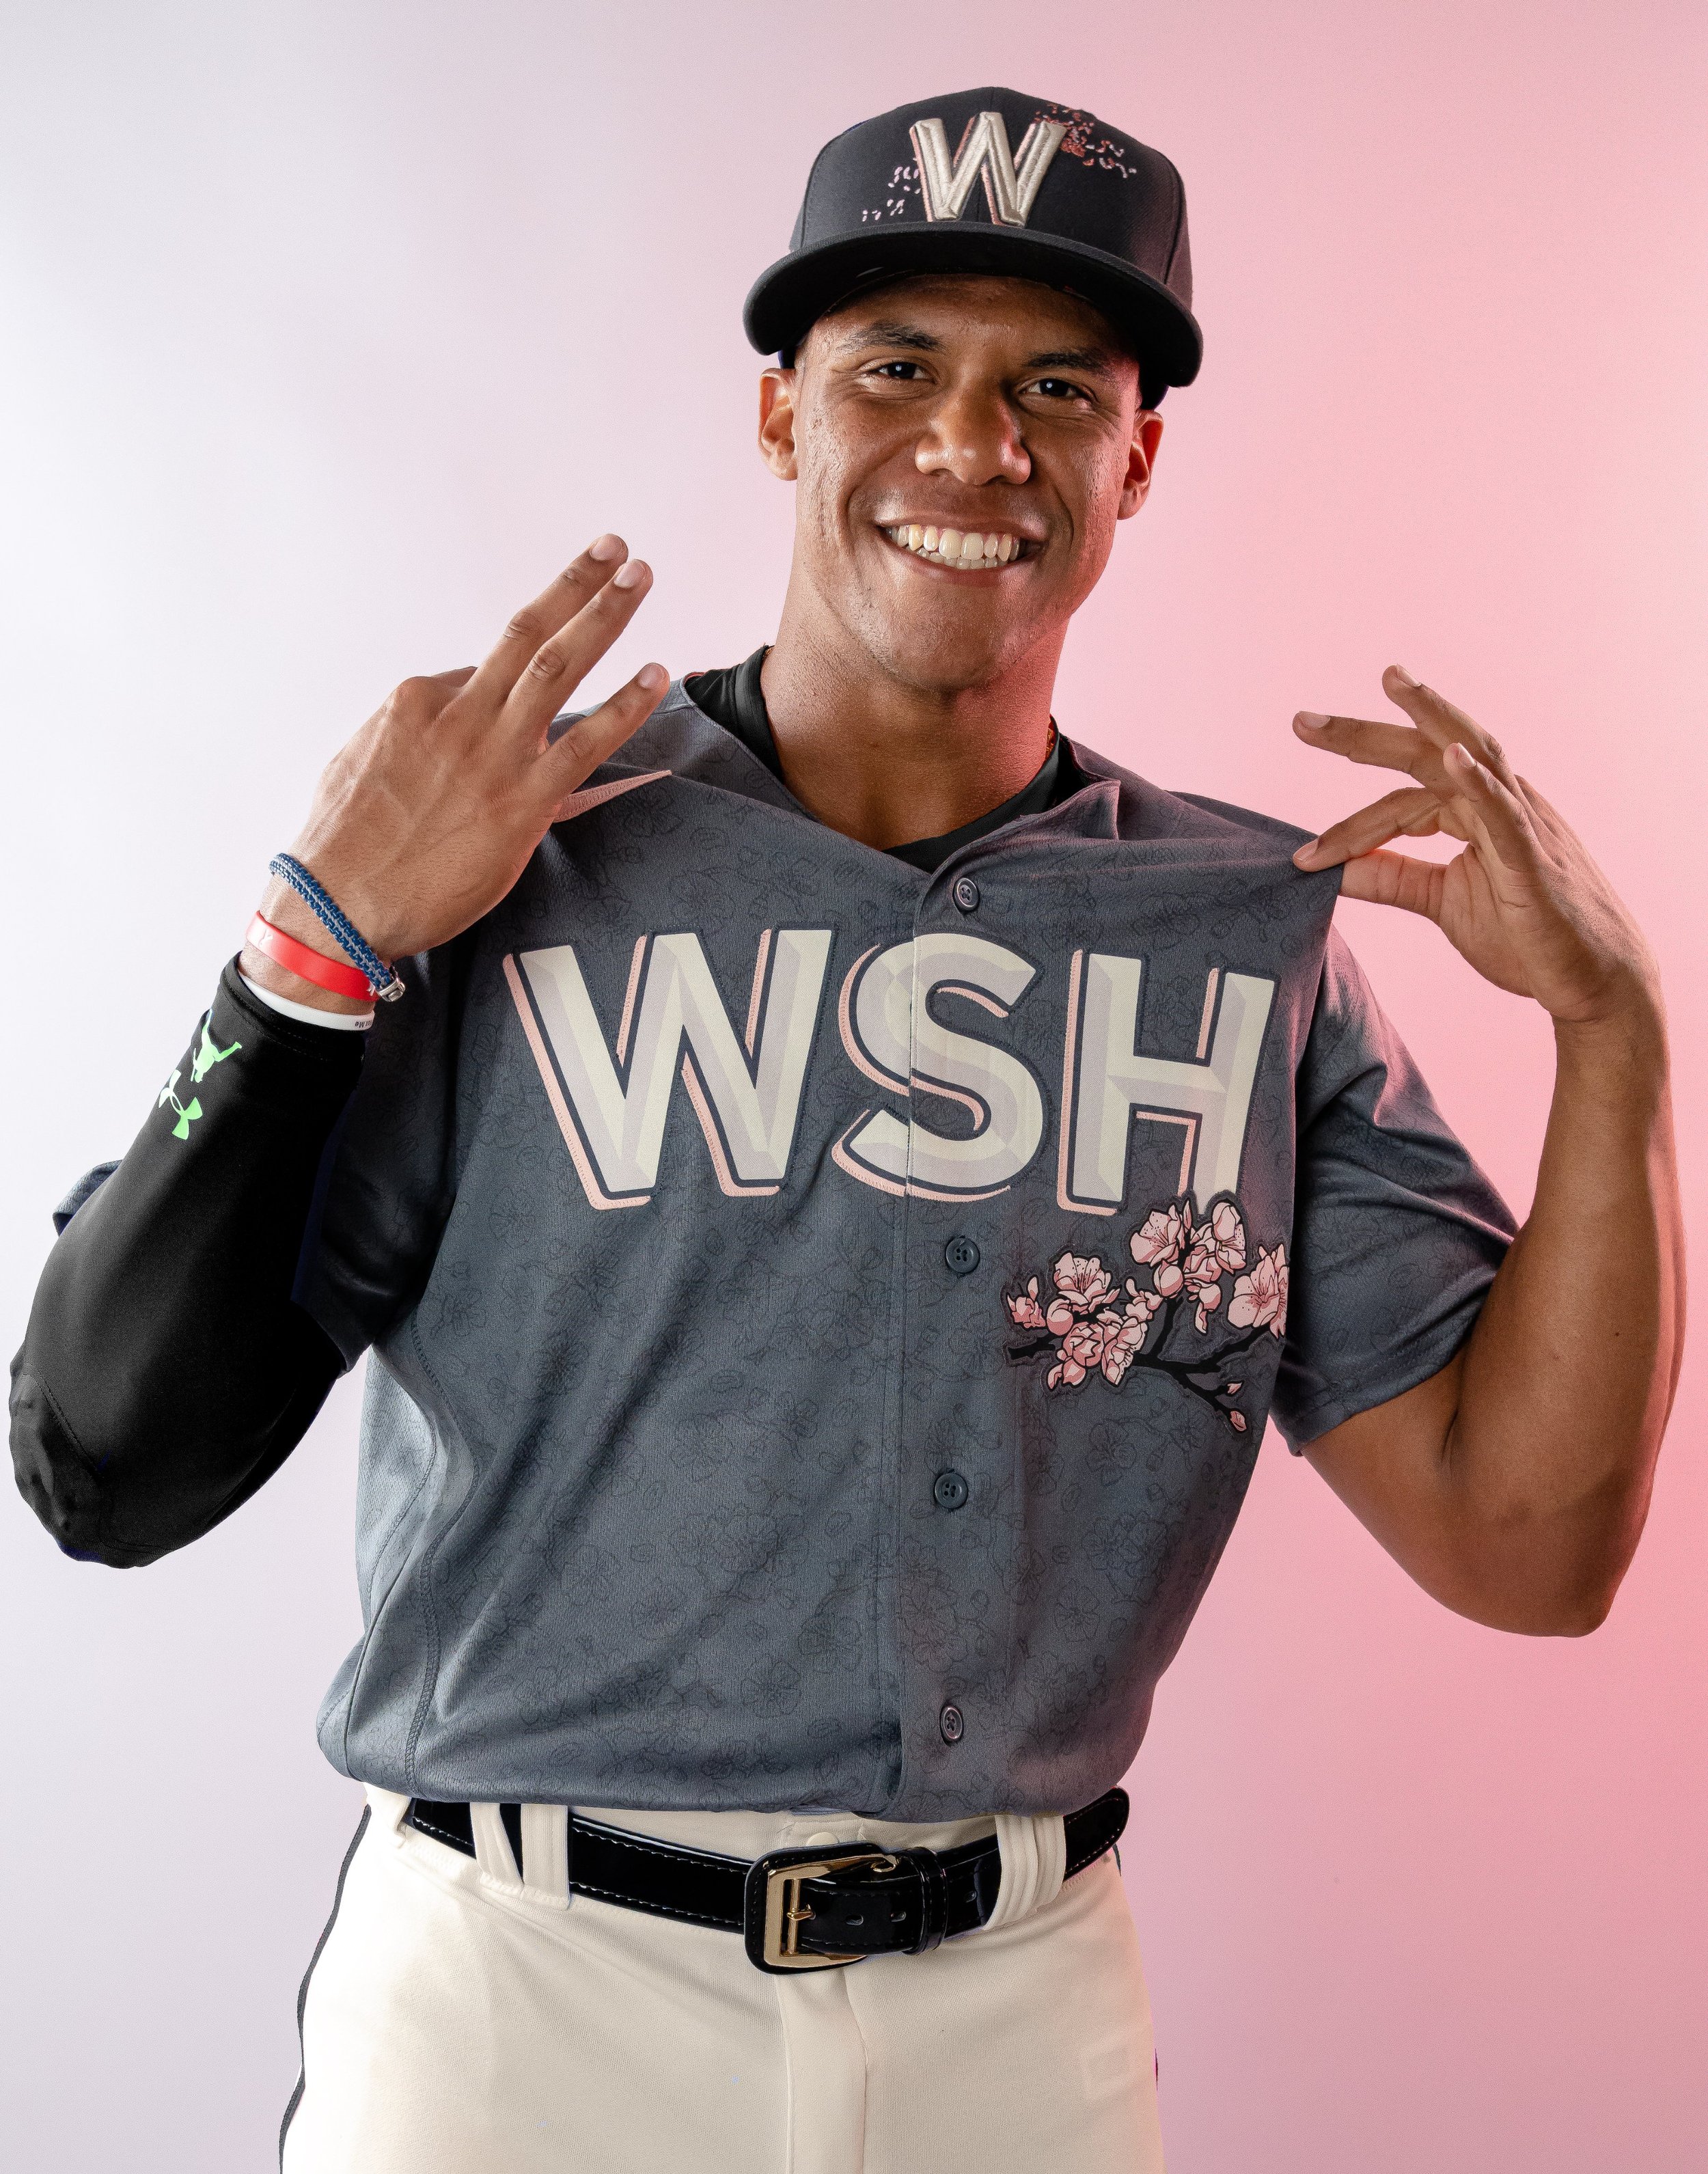 nationals city connect jerseys